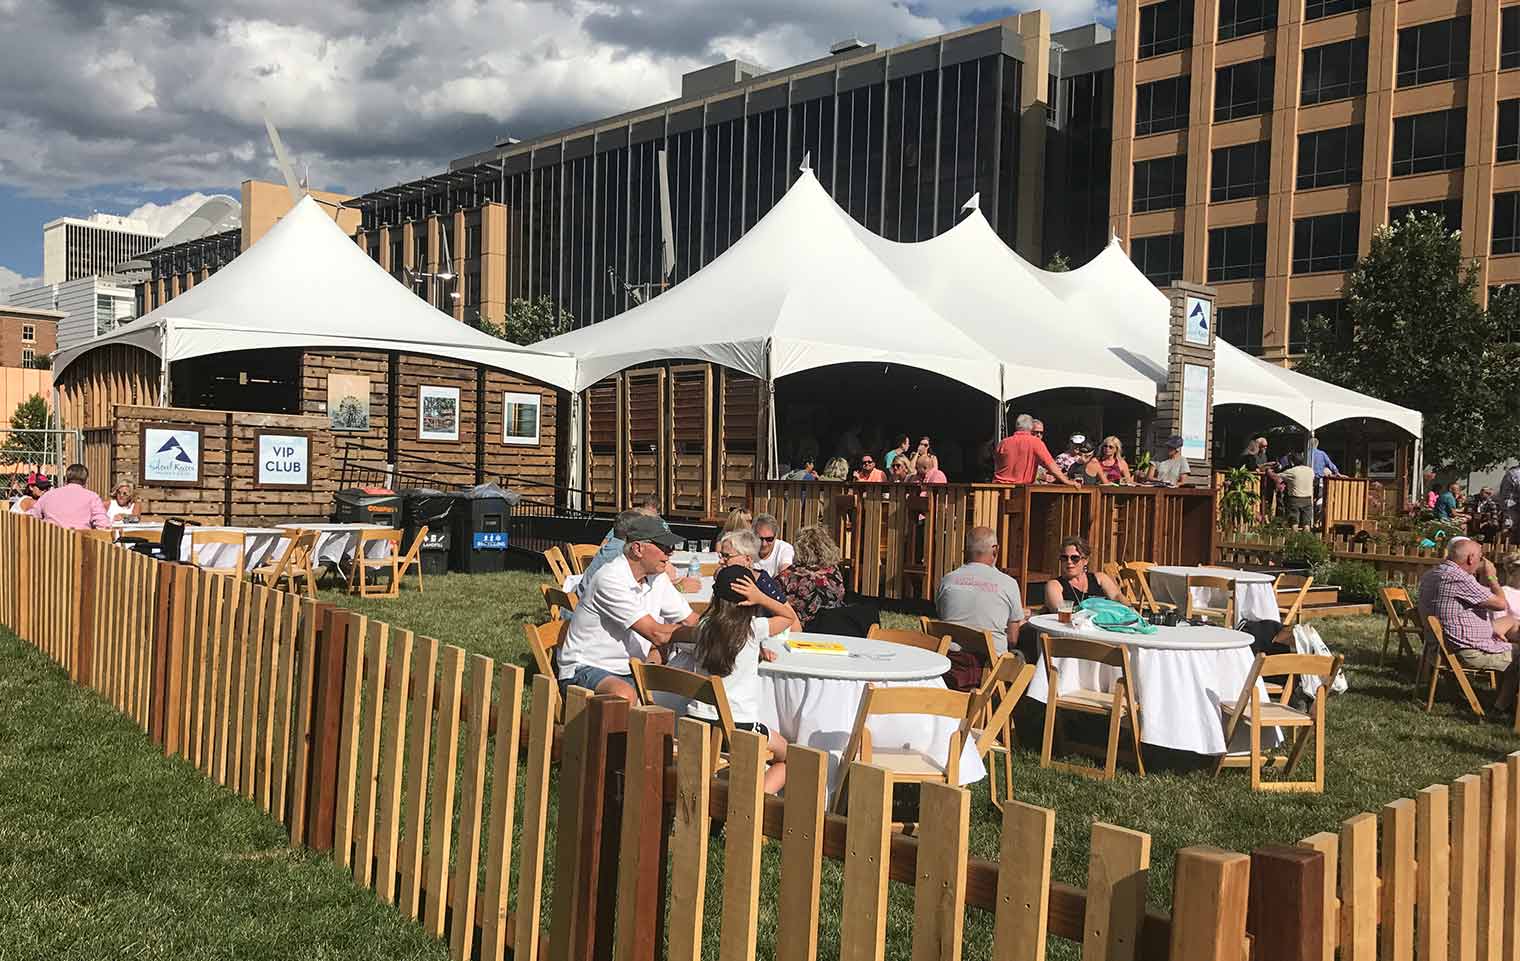 2017 Des Moines Arts Festival Silent Rivers VIP Club where Festival Patrons enjoy seated tables and a large tent